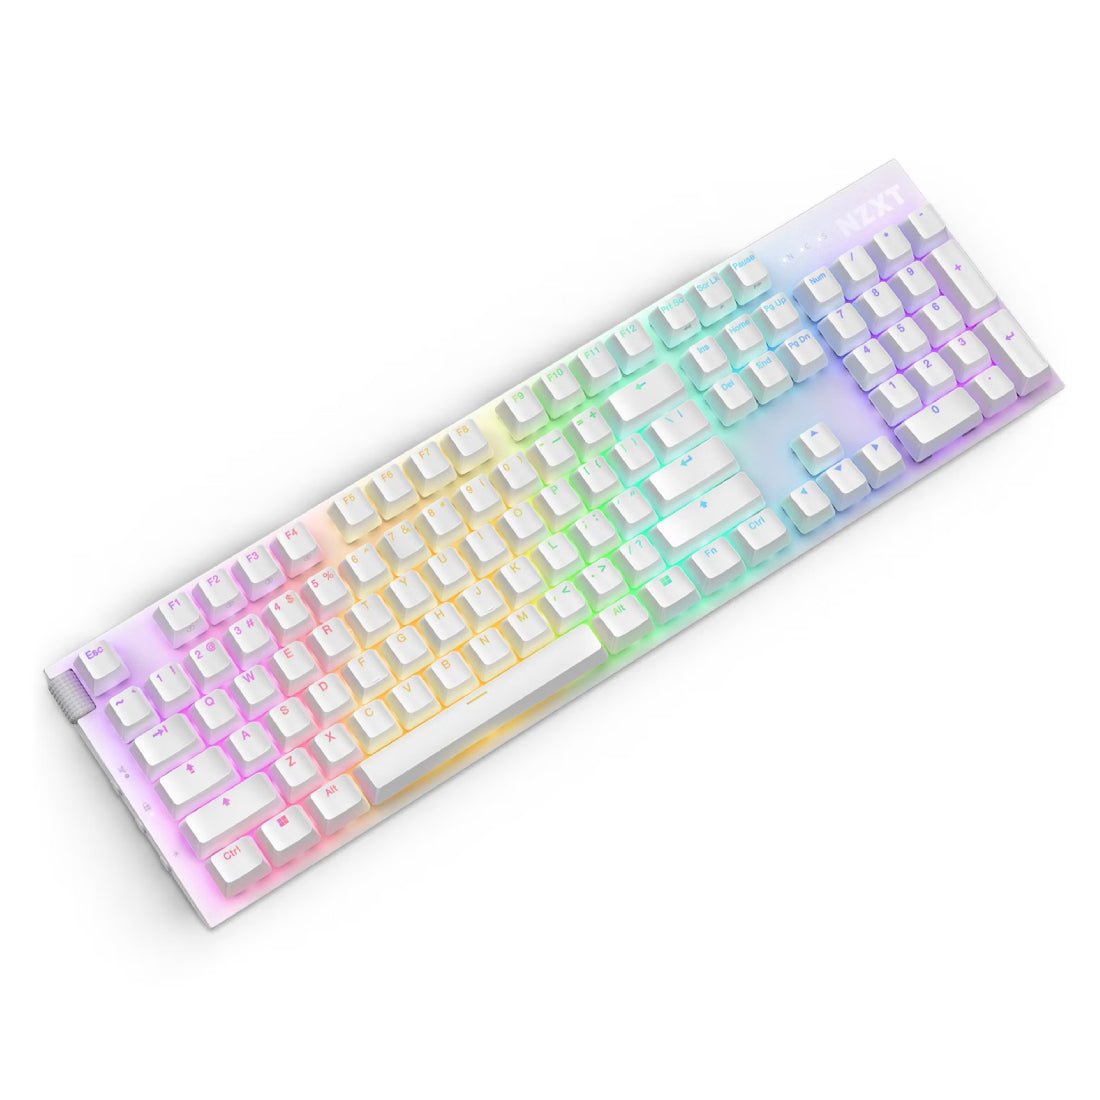 NZXT Function 2 Full Size RGB Wired Mechanical Gaming Keyboard - Matte White - لوحة مفاتيح - Store 974 | ستور ٩٧٤